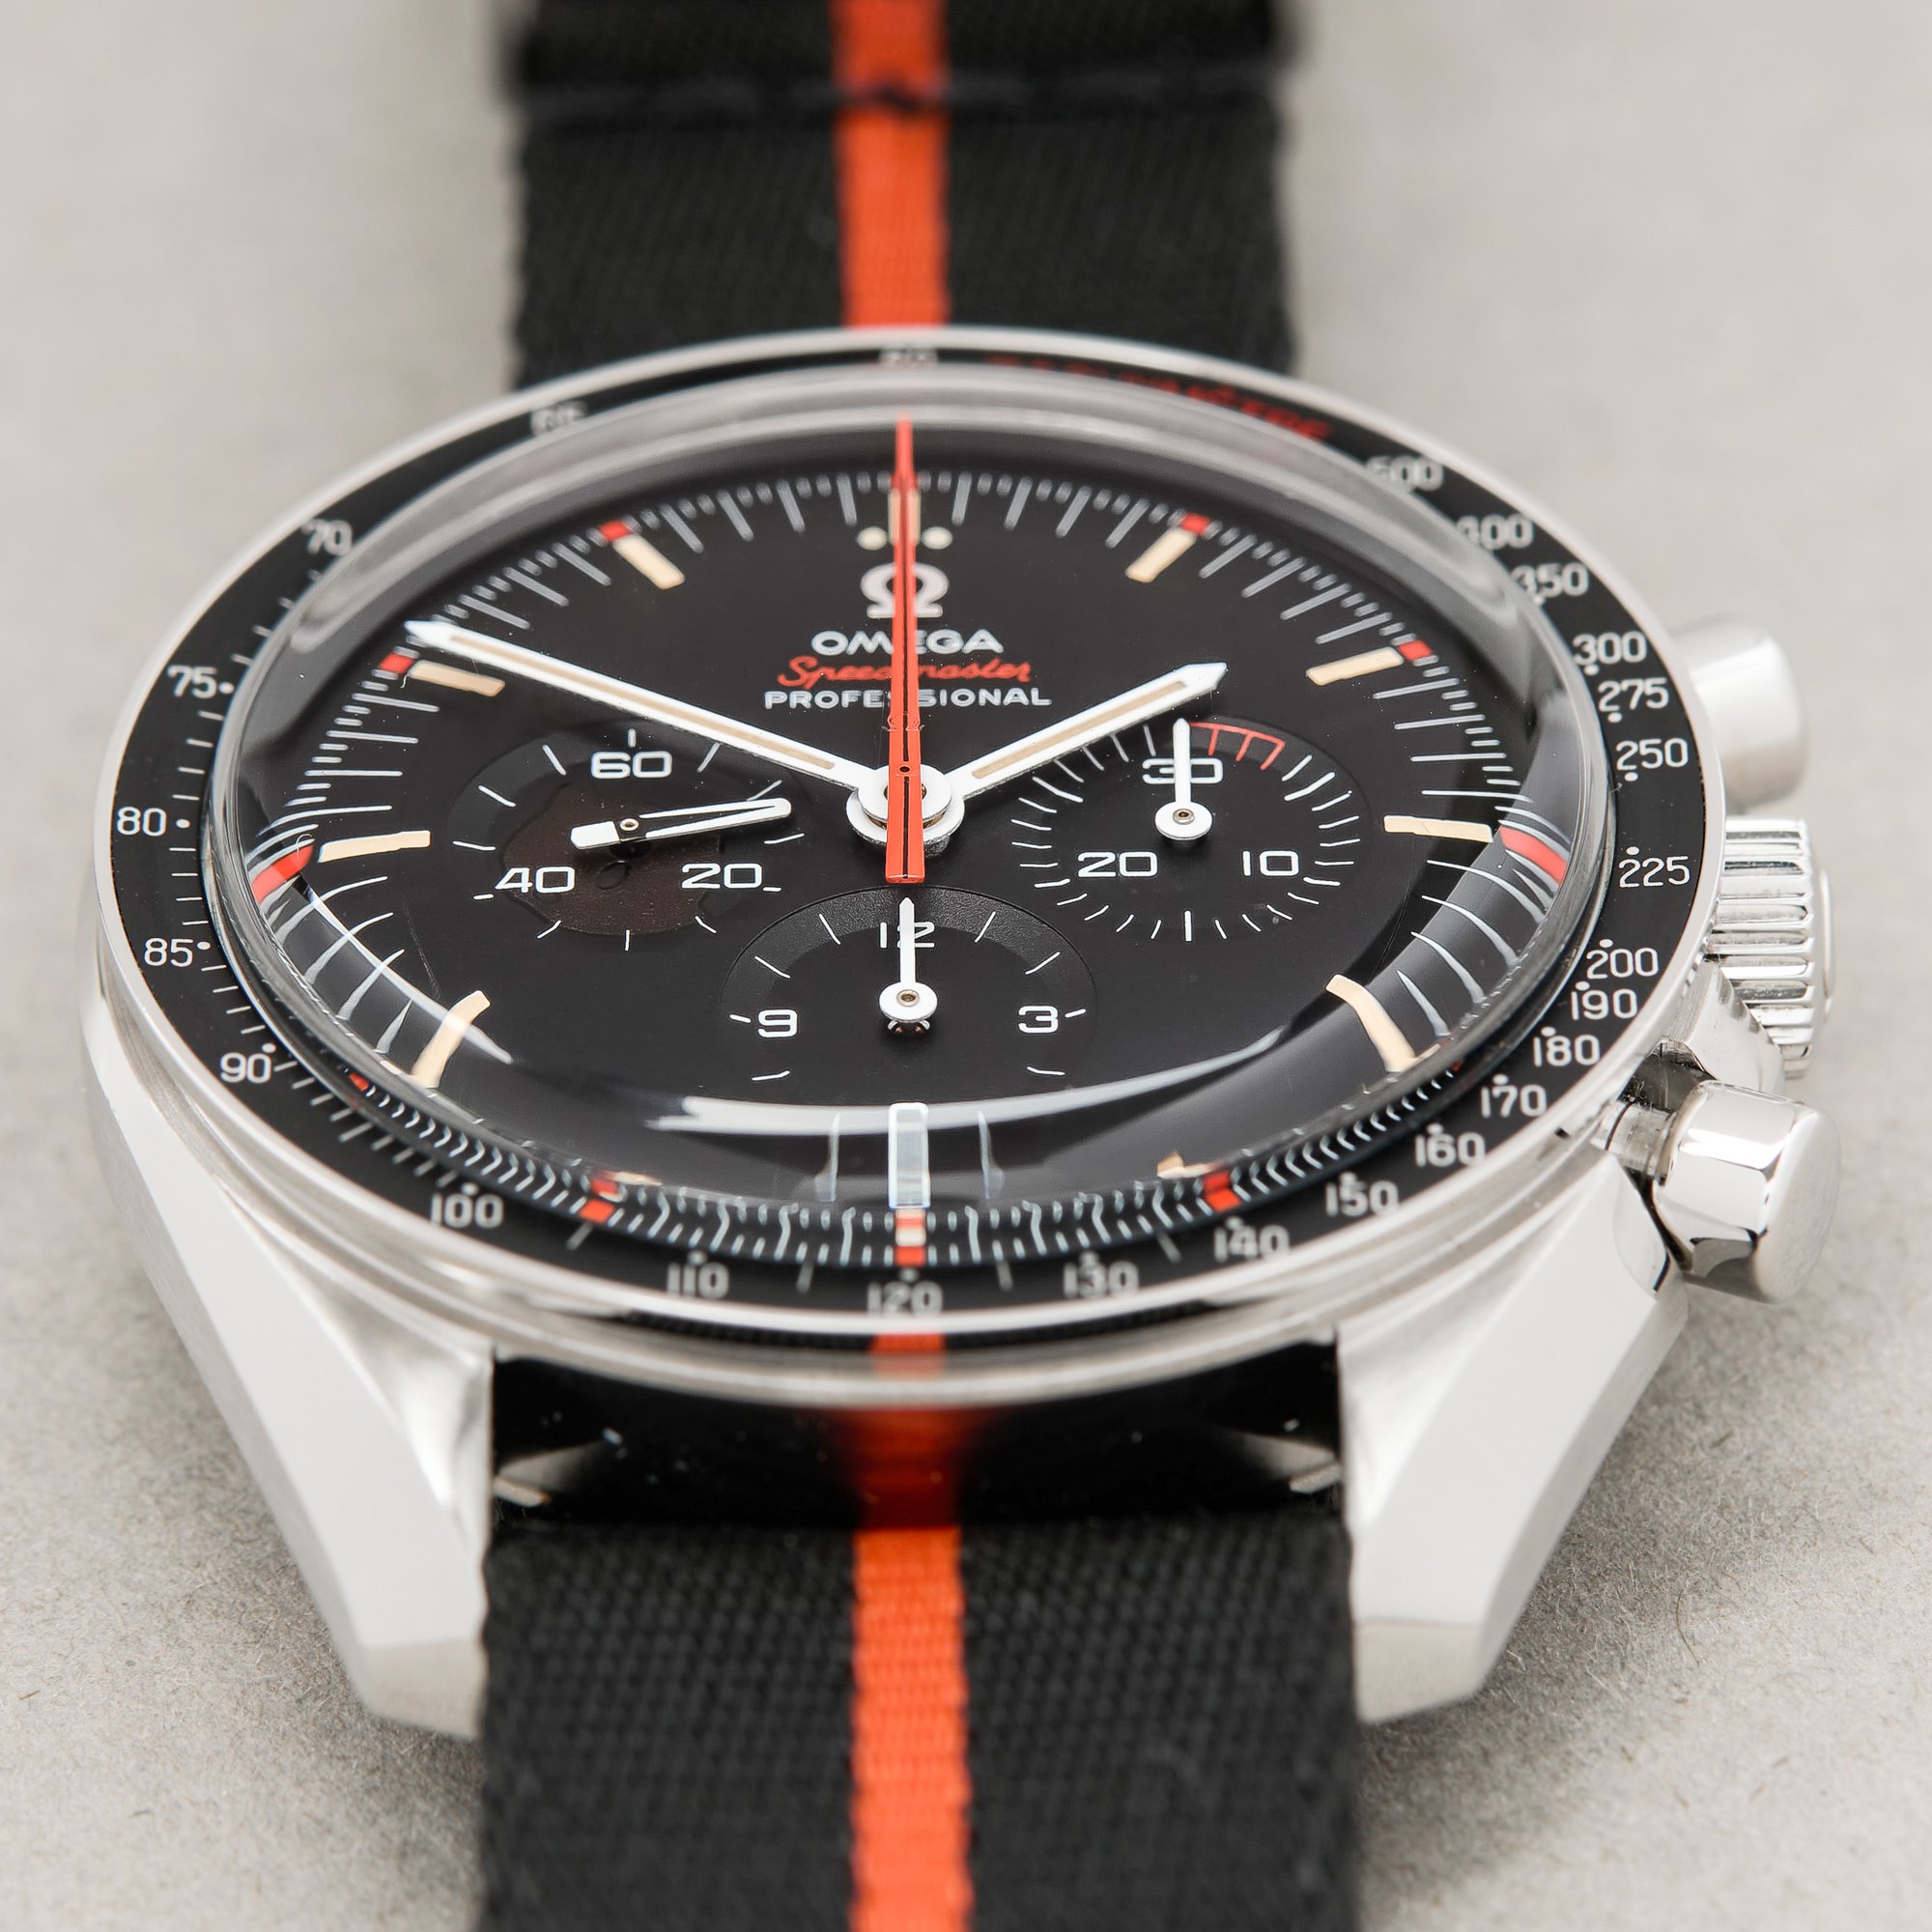 Omega Speedmaster Ultraman Limited Edition of 2012 Pieces Stainless Steel 311.12.42.30.01.001